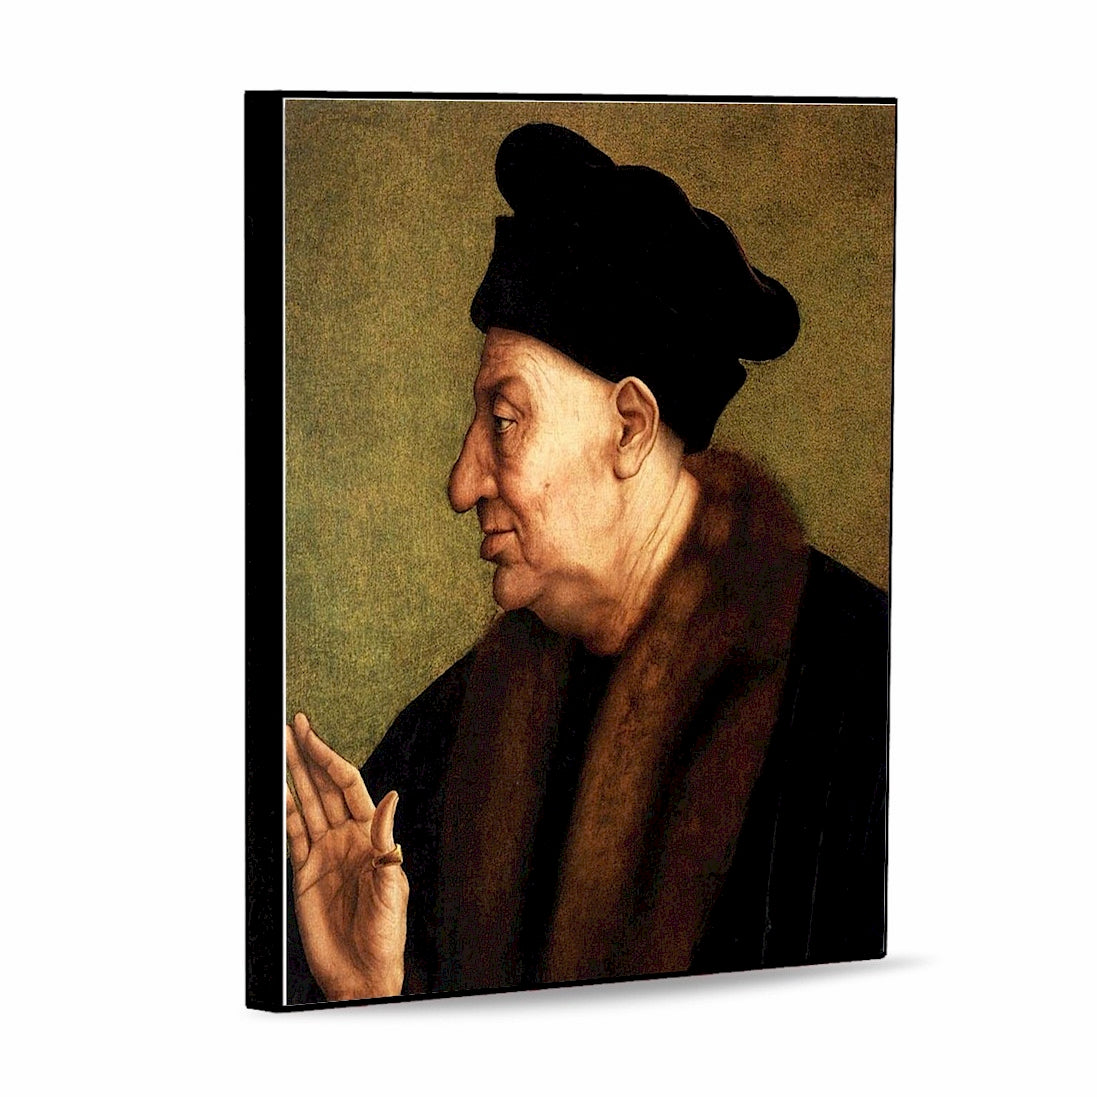 AFFRESCO: Panel Tile - Opera "Portrait of an Old Man" by Quentin Metsys (8x10)